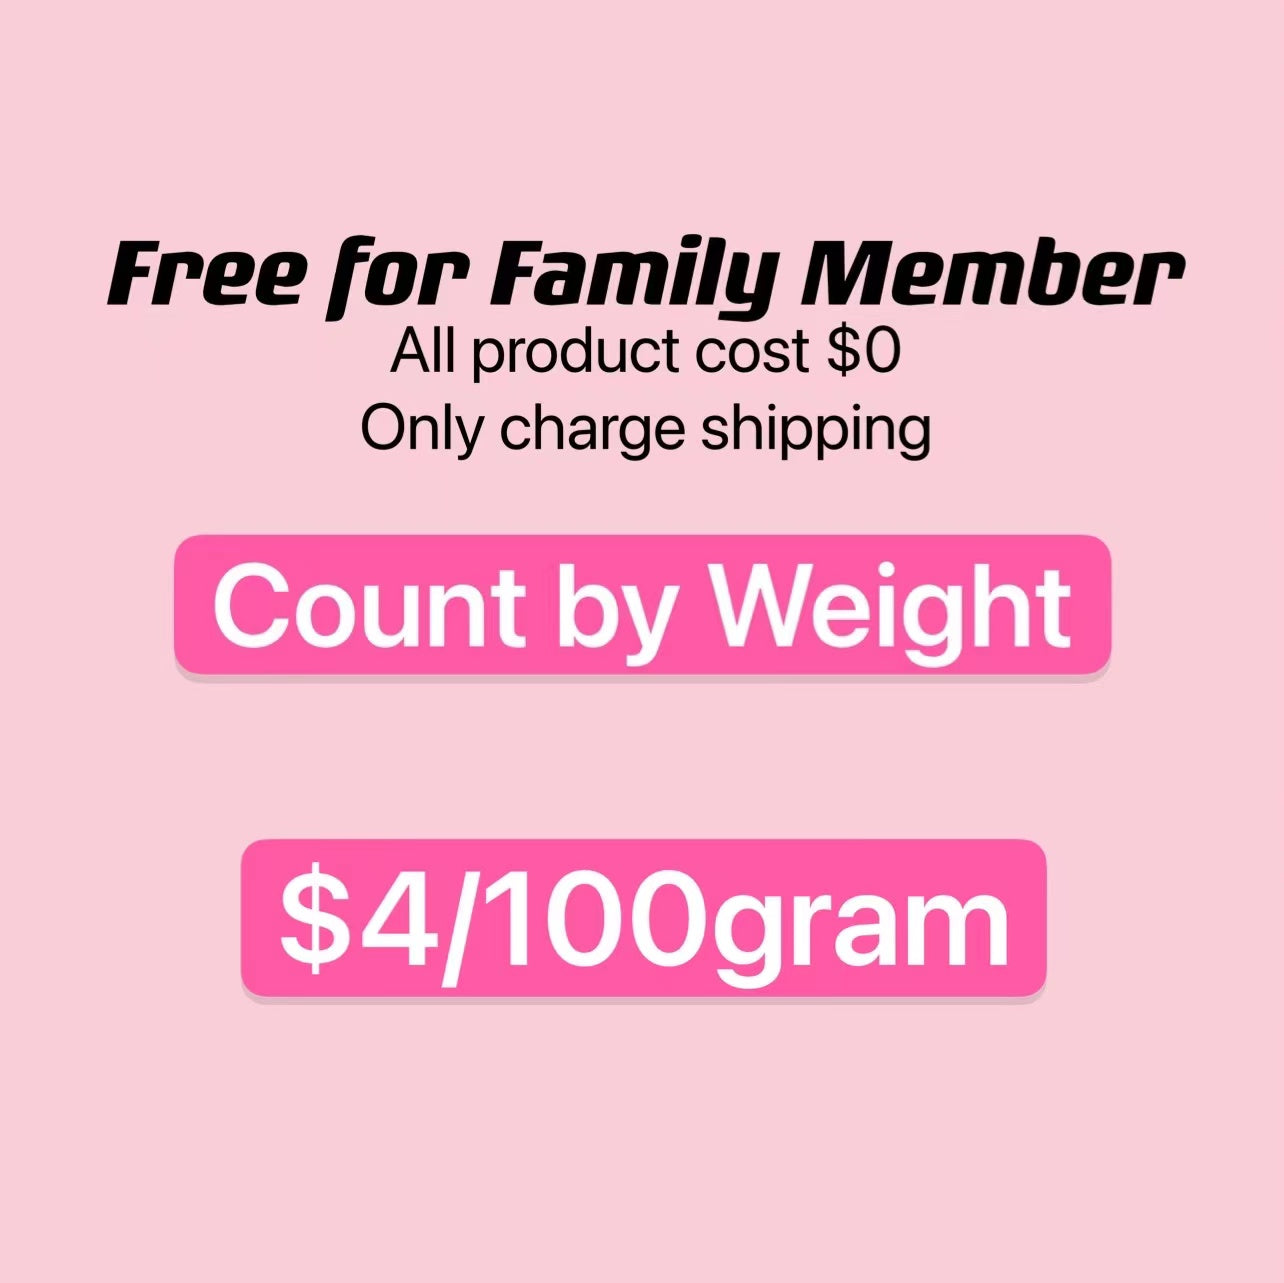 【$3/100gram】Count by weight, only charge shipping